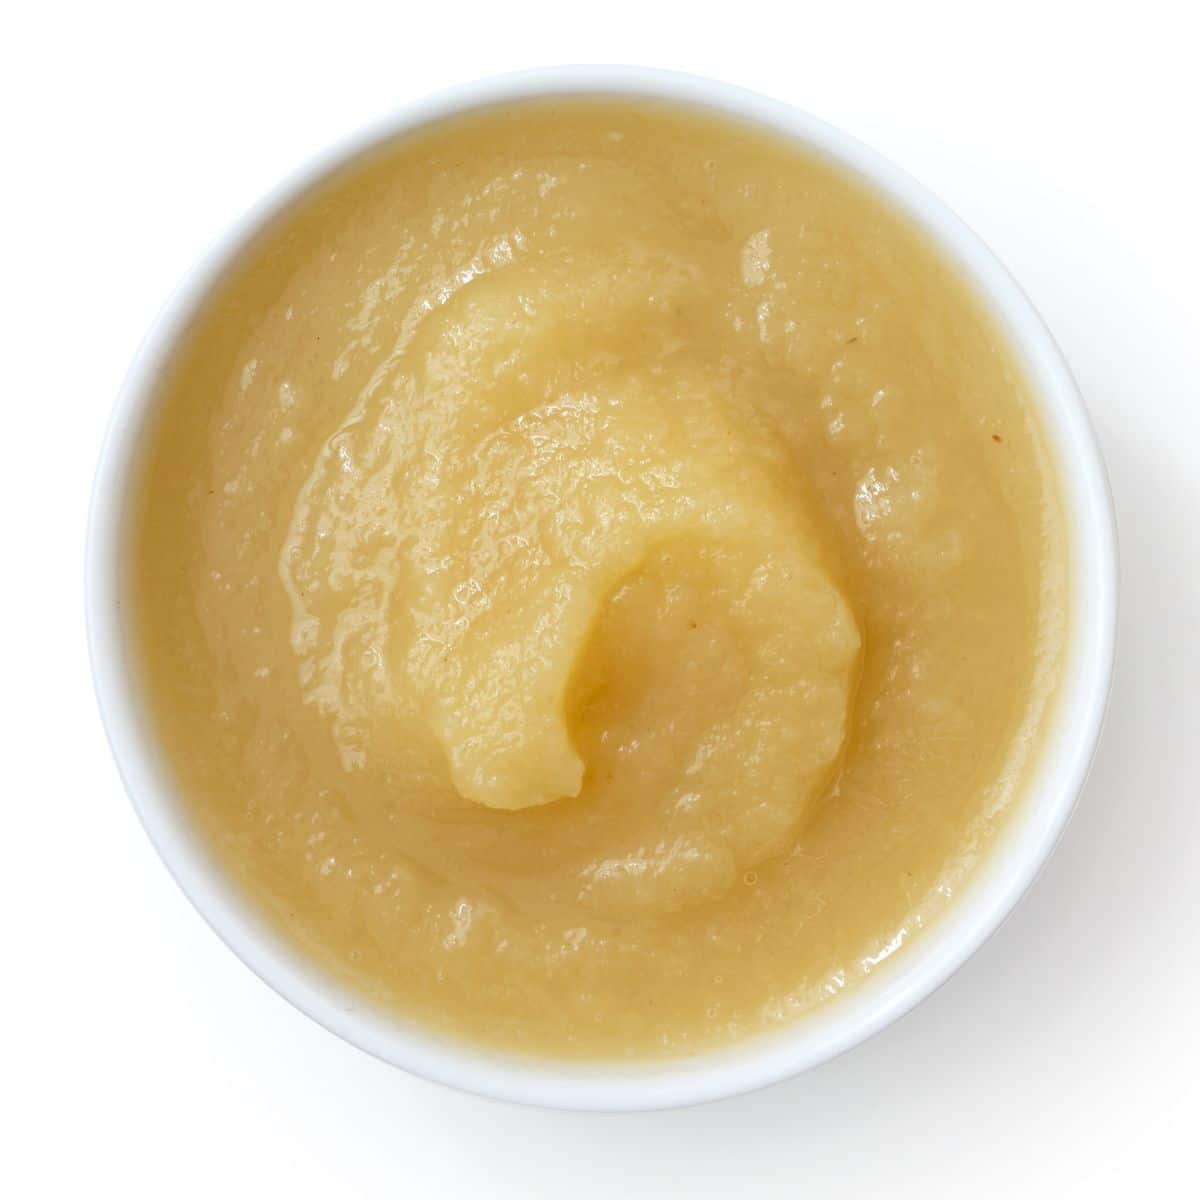 Applesauce in a bowl on a white background.